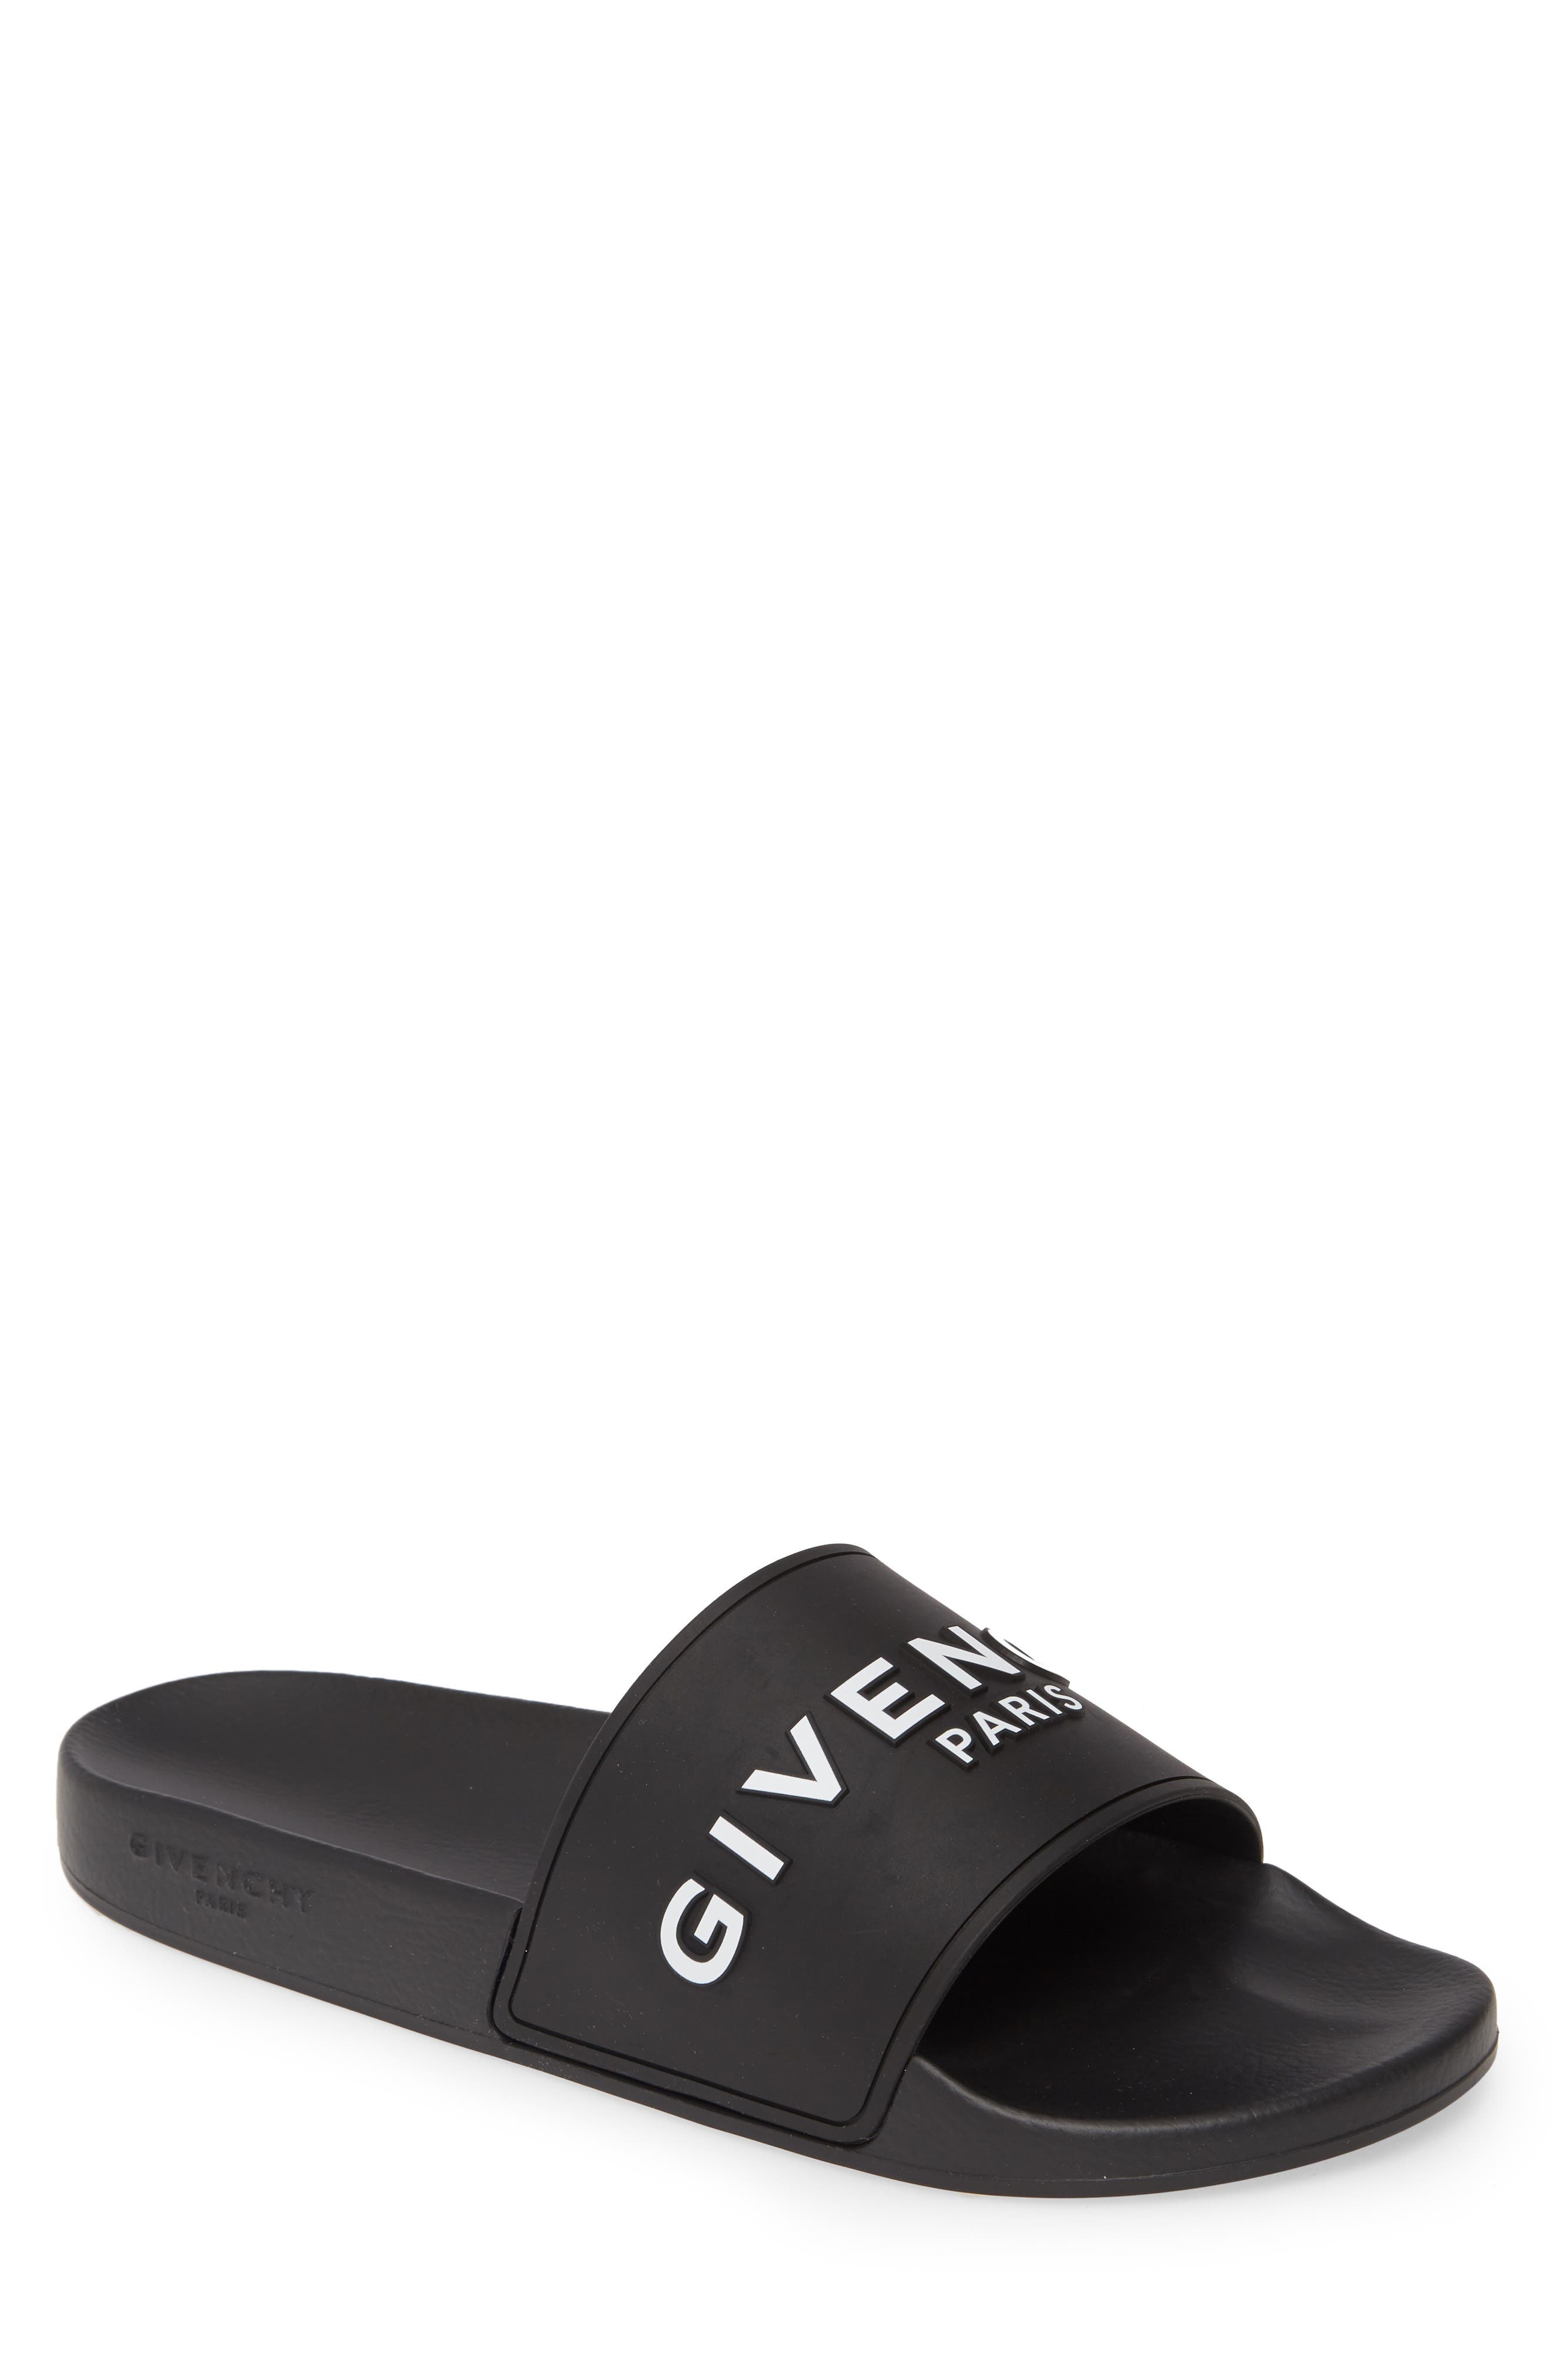 givenchy slippers mens